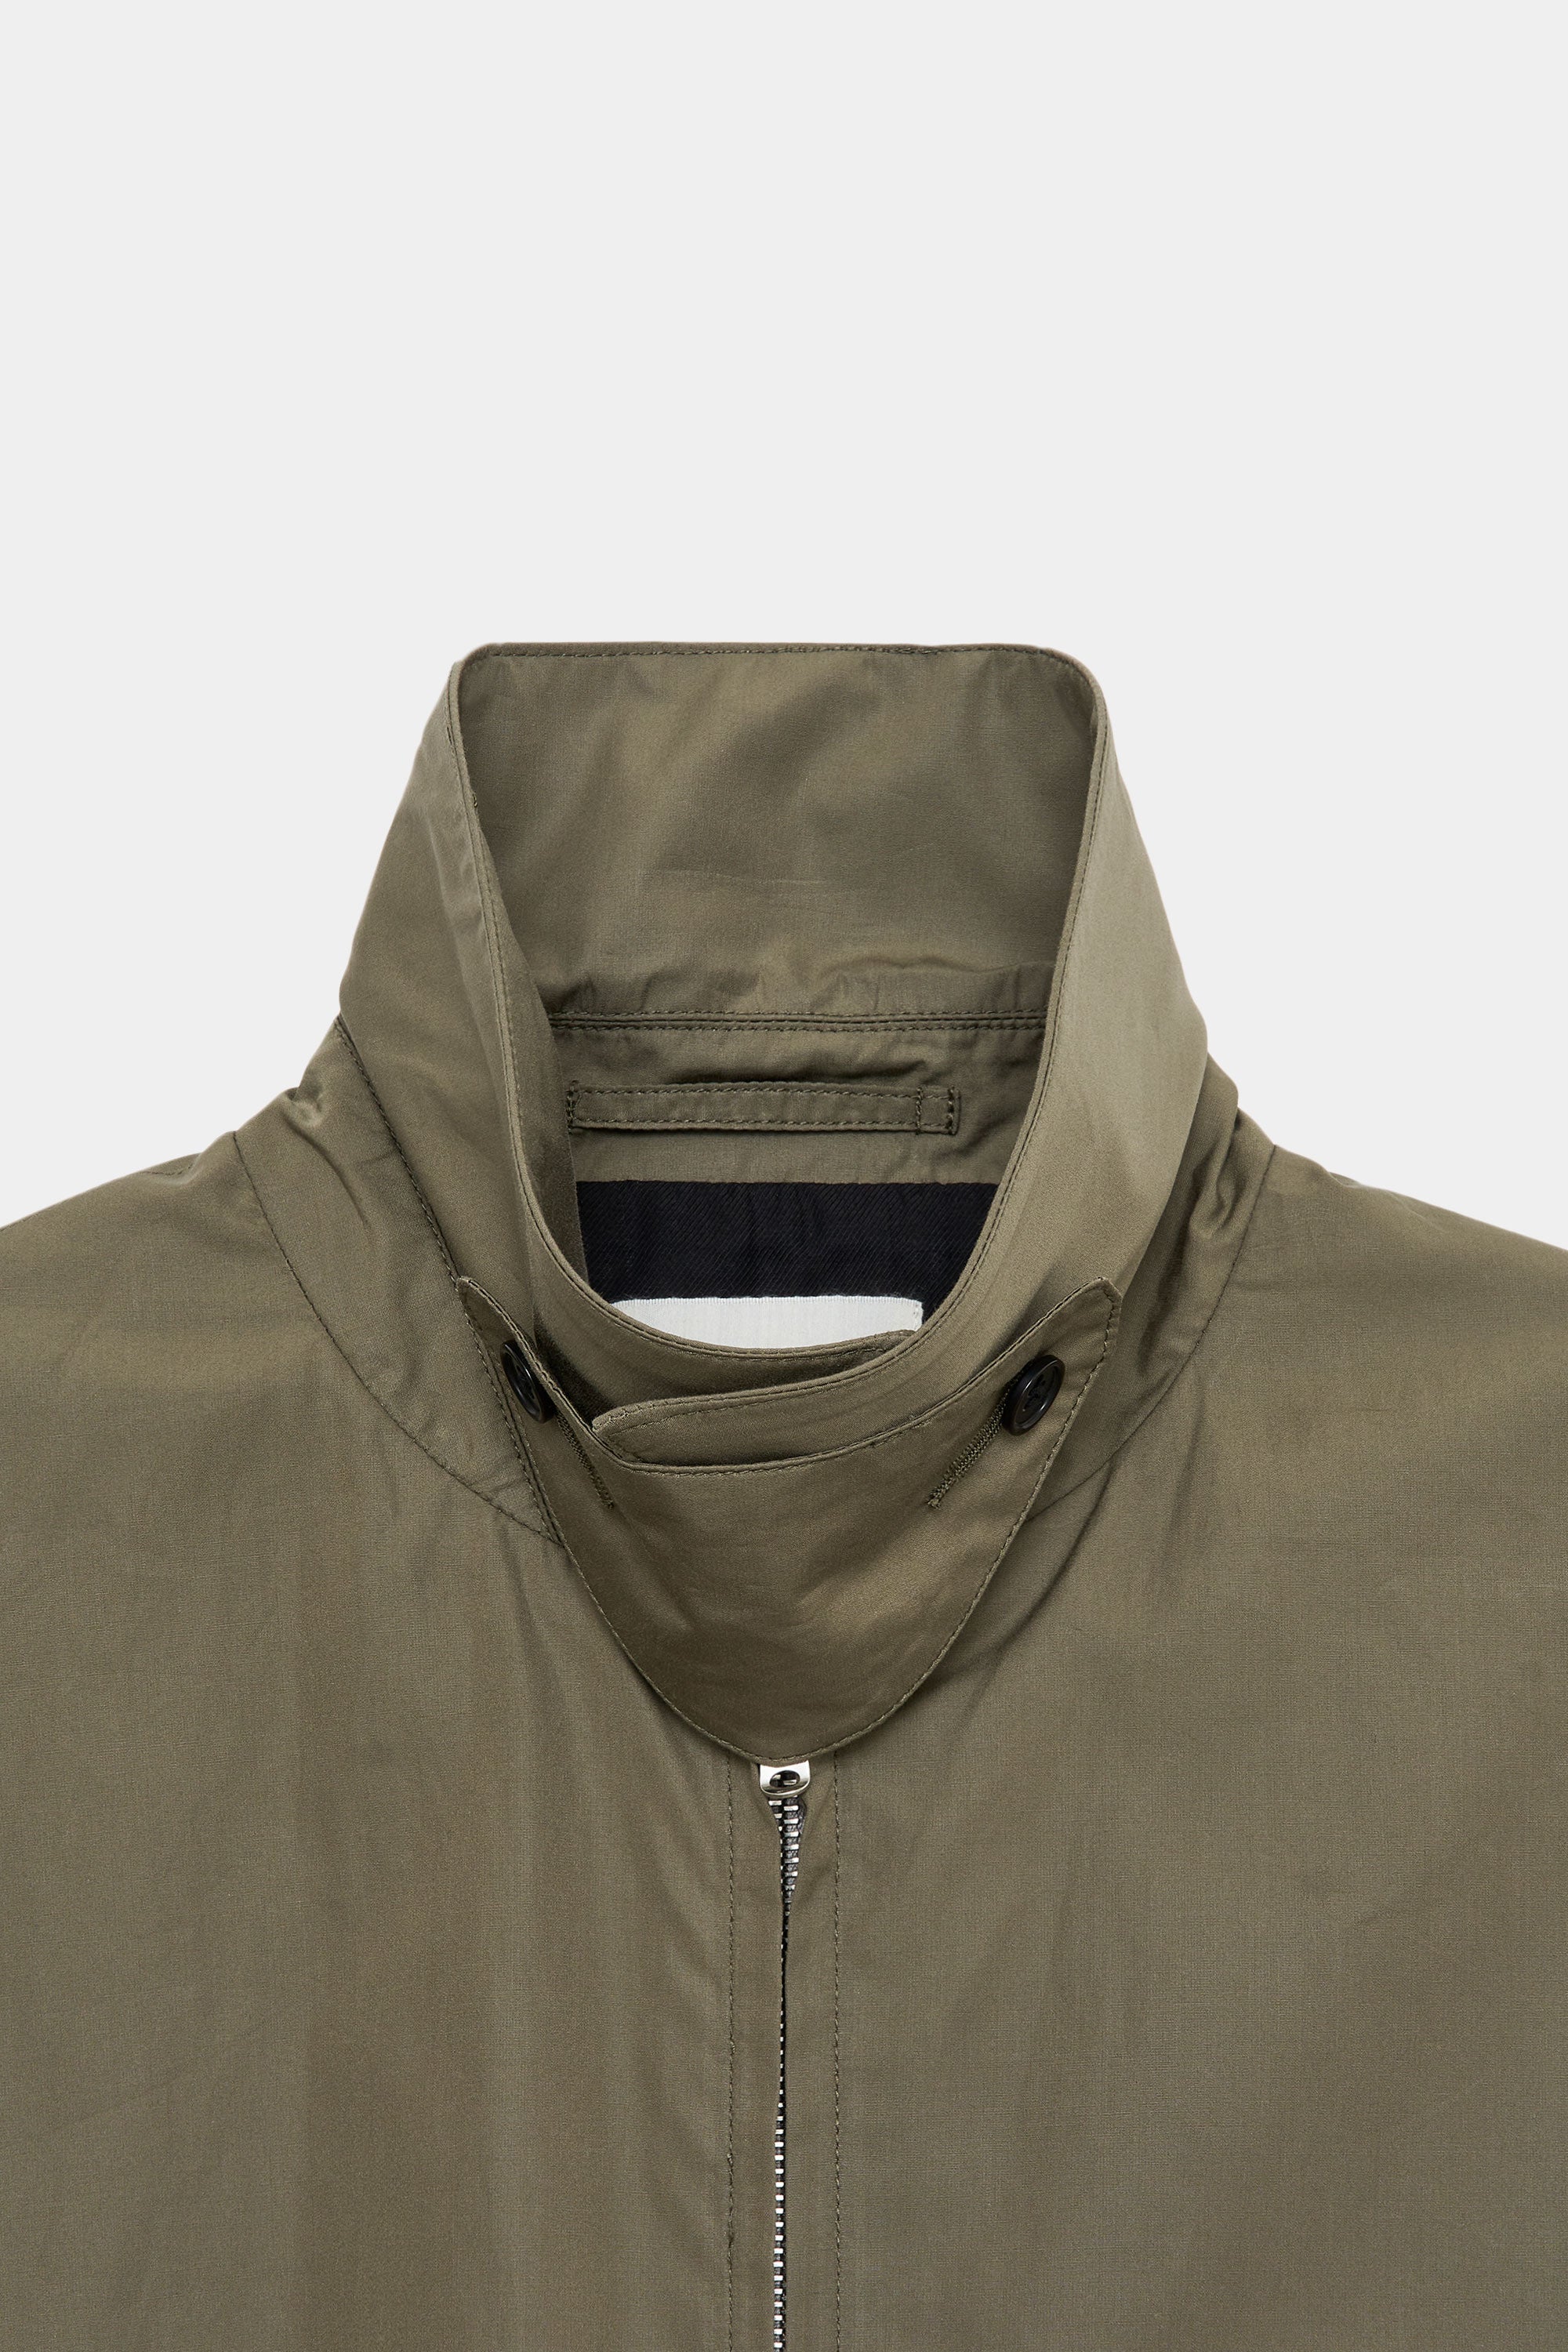 ULTRA LIGHT ALL WEATHER CLOTH WIDE SPORTS JACKET, Sage Green